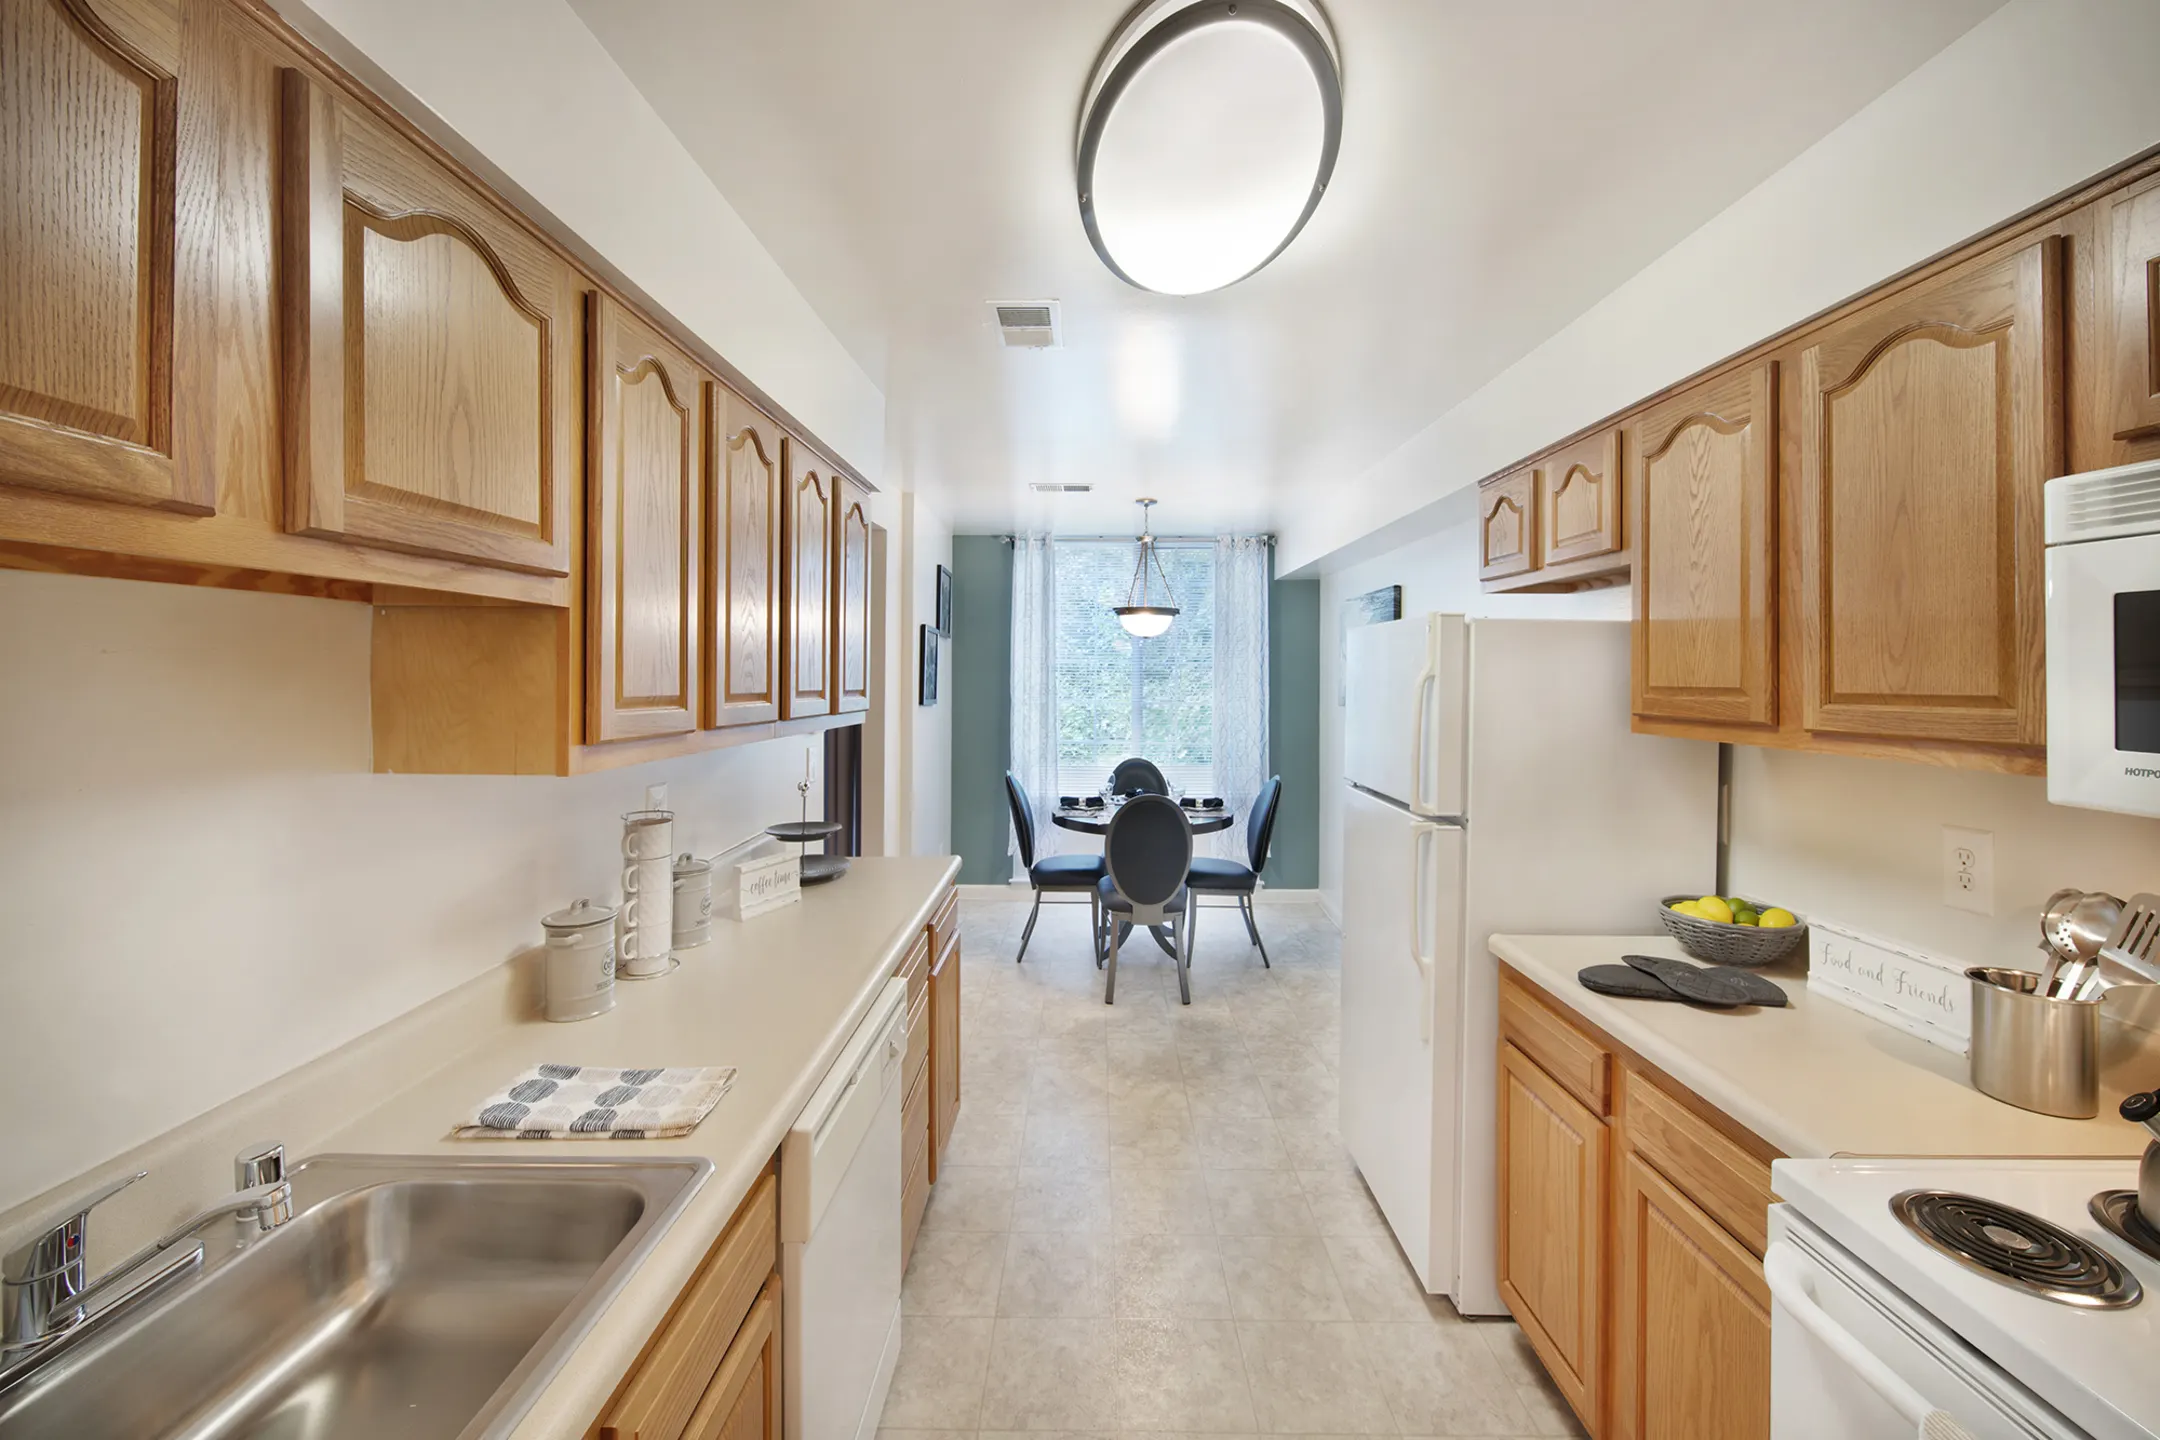 Kitchen - The Apartments at Canterbury - Rosedale, MD